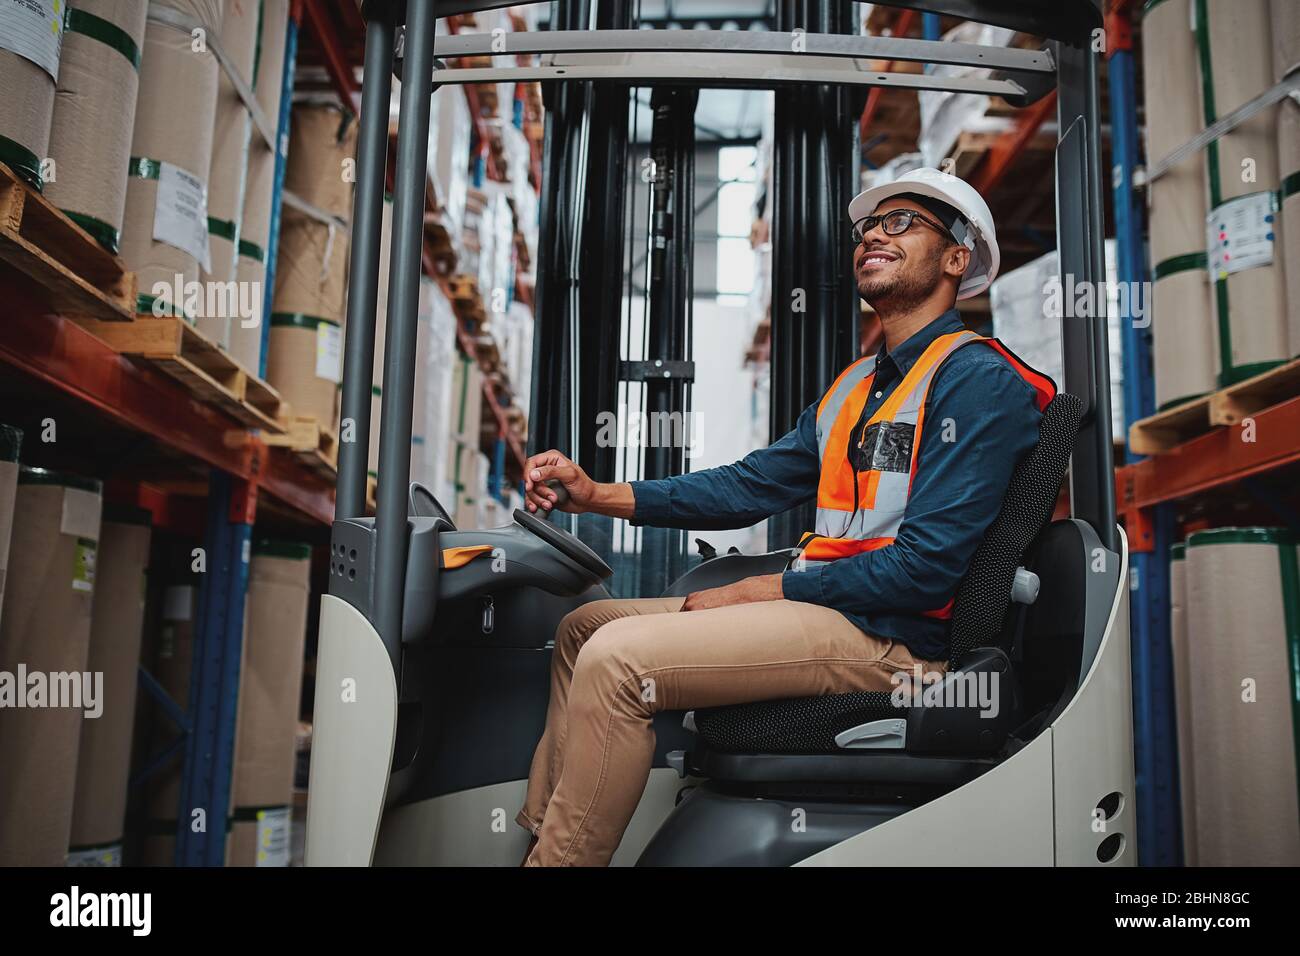 African forklift driver focused on carefully transporting stock from shelves of a large warehouse wearing a white helmet and vest looking up towards Stock Photo